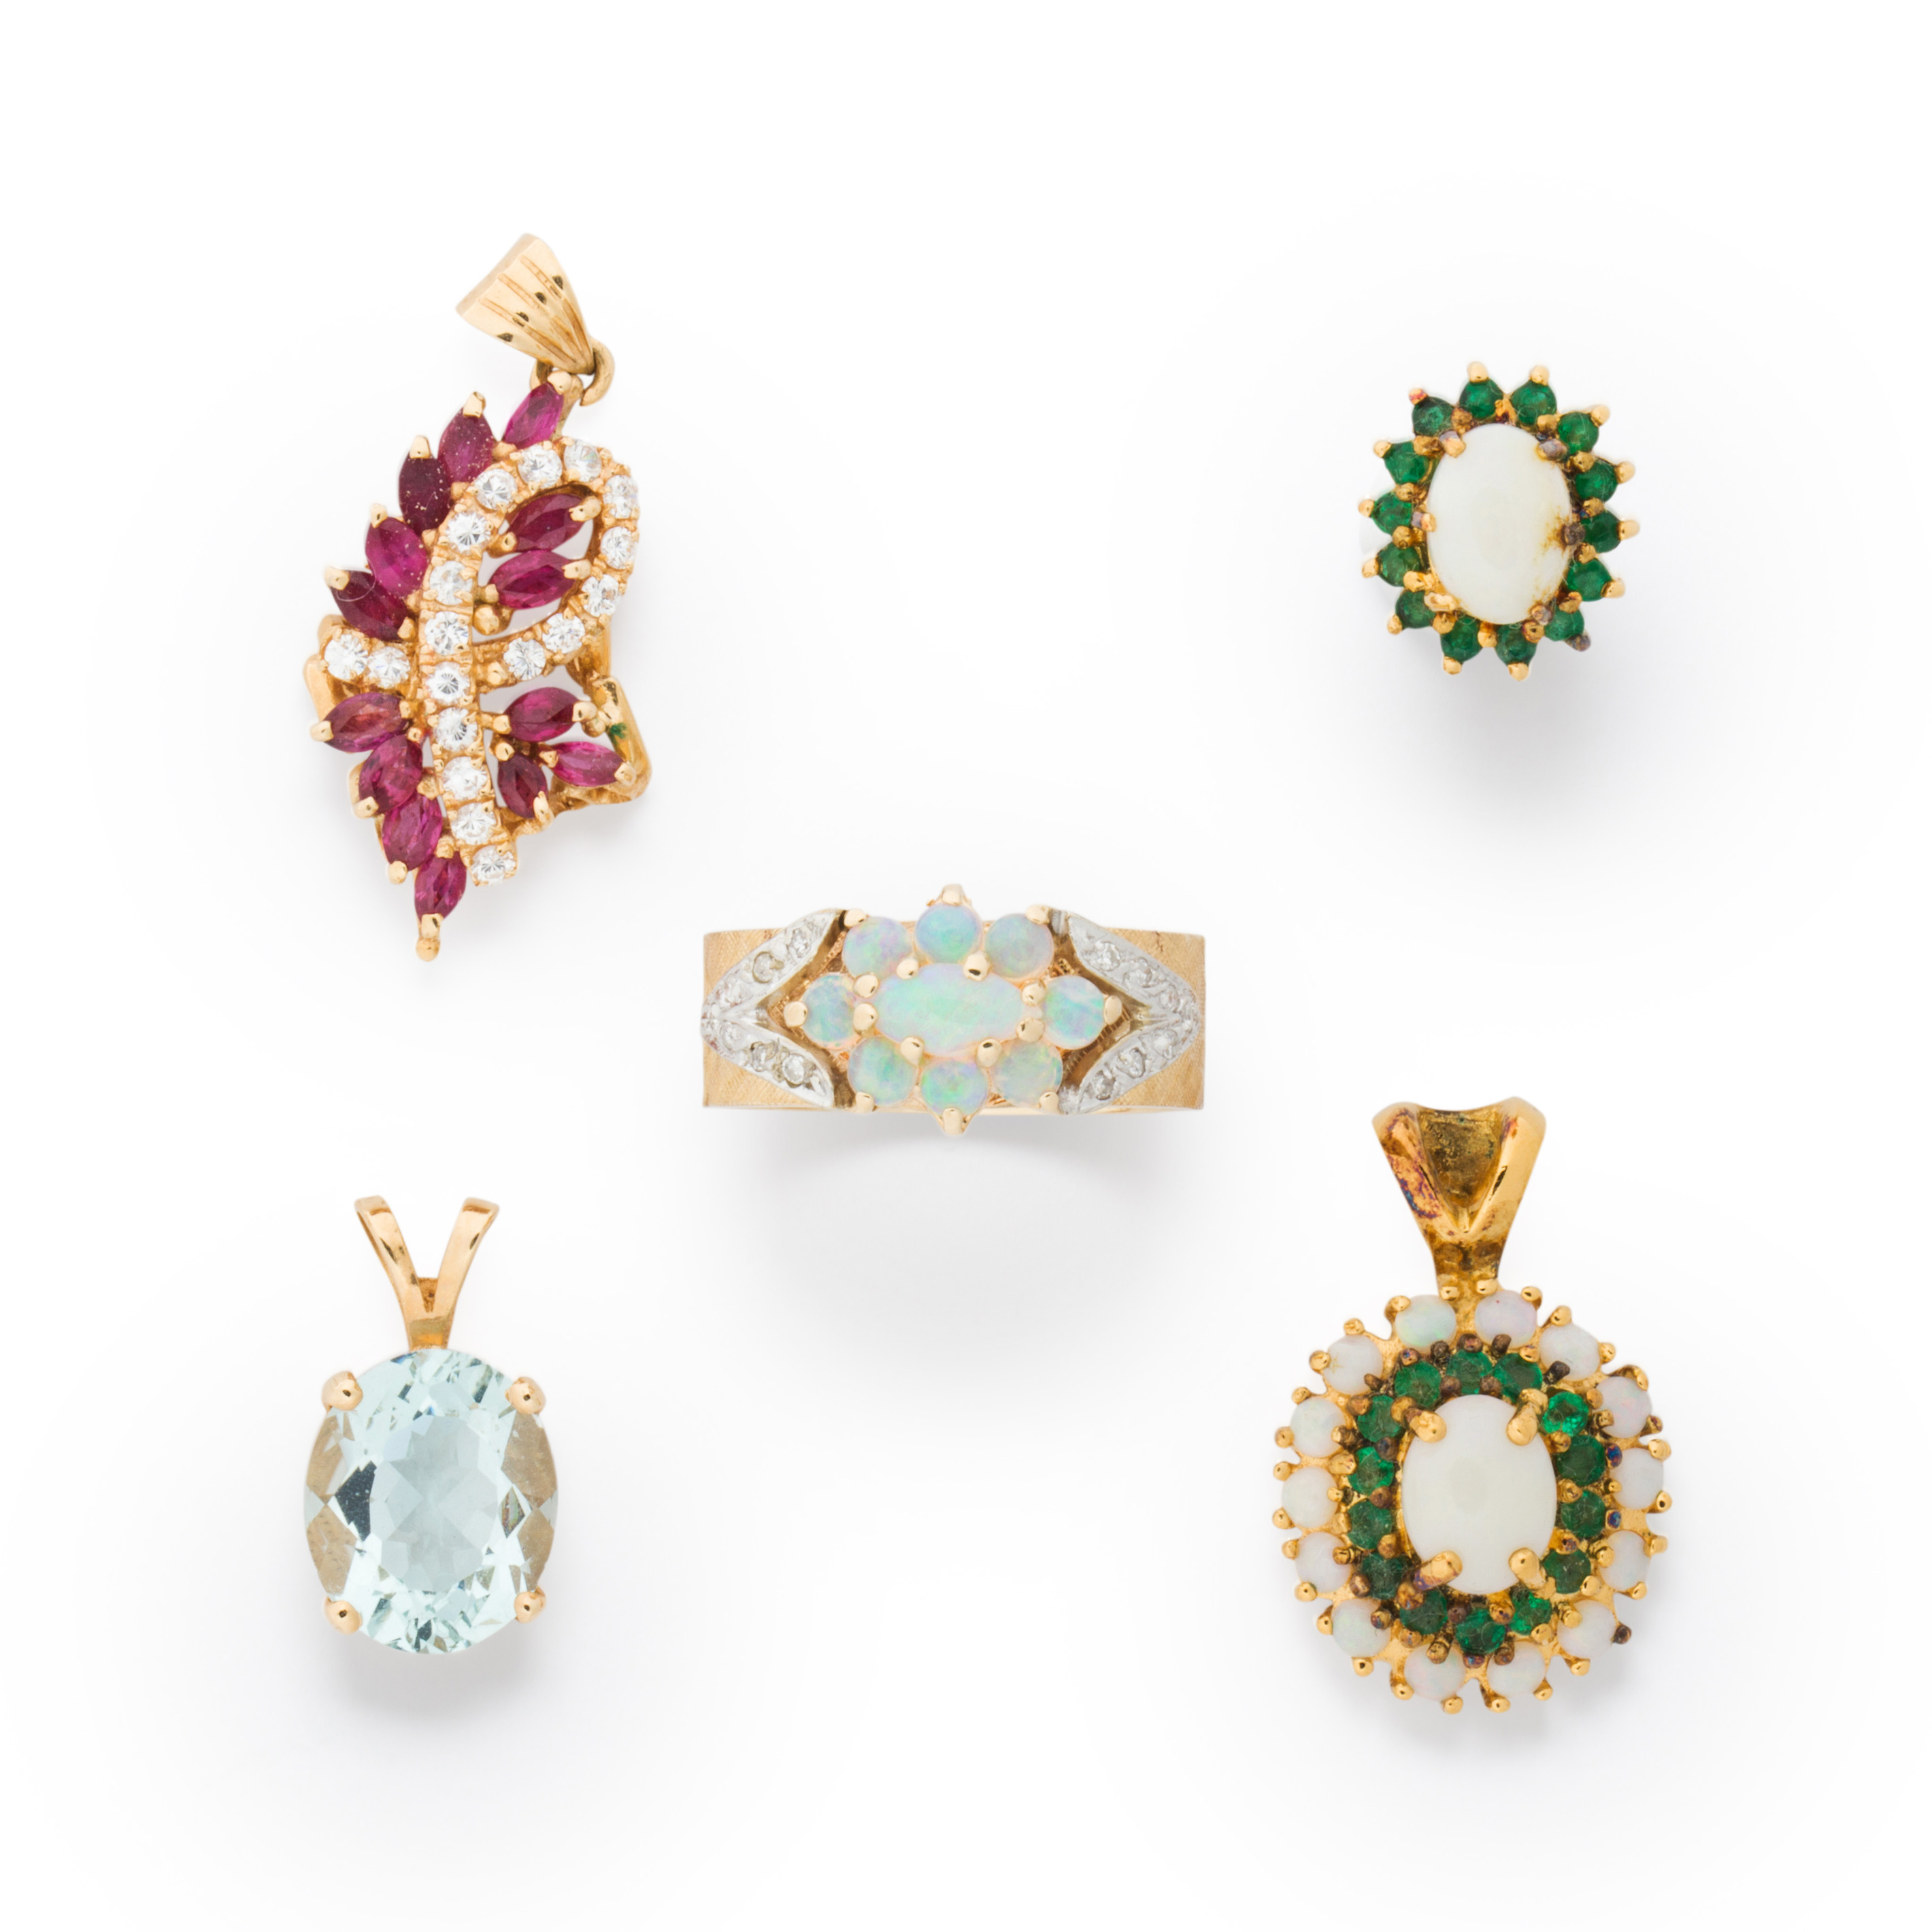 A GROUP OF GEMSTONE JEWELRY A group